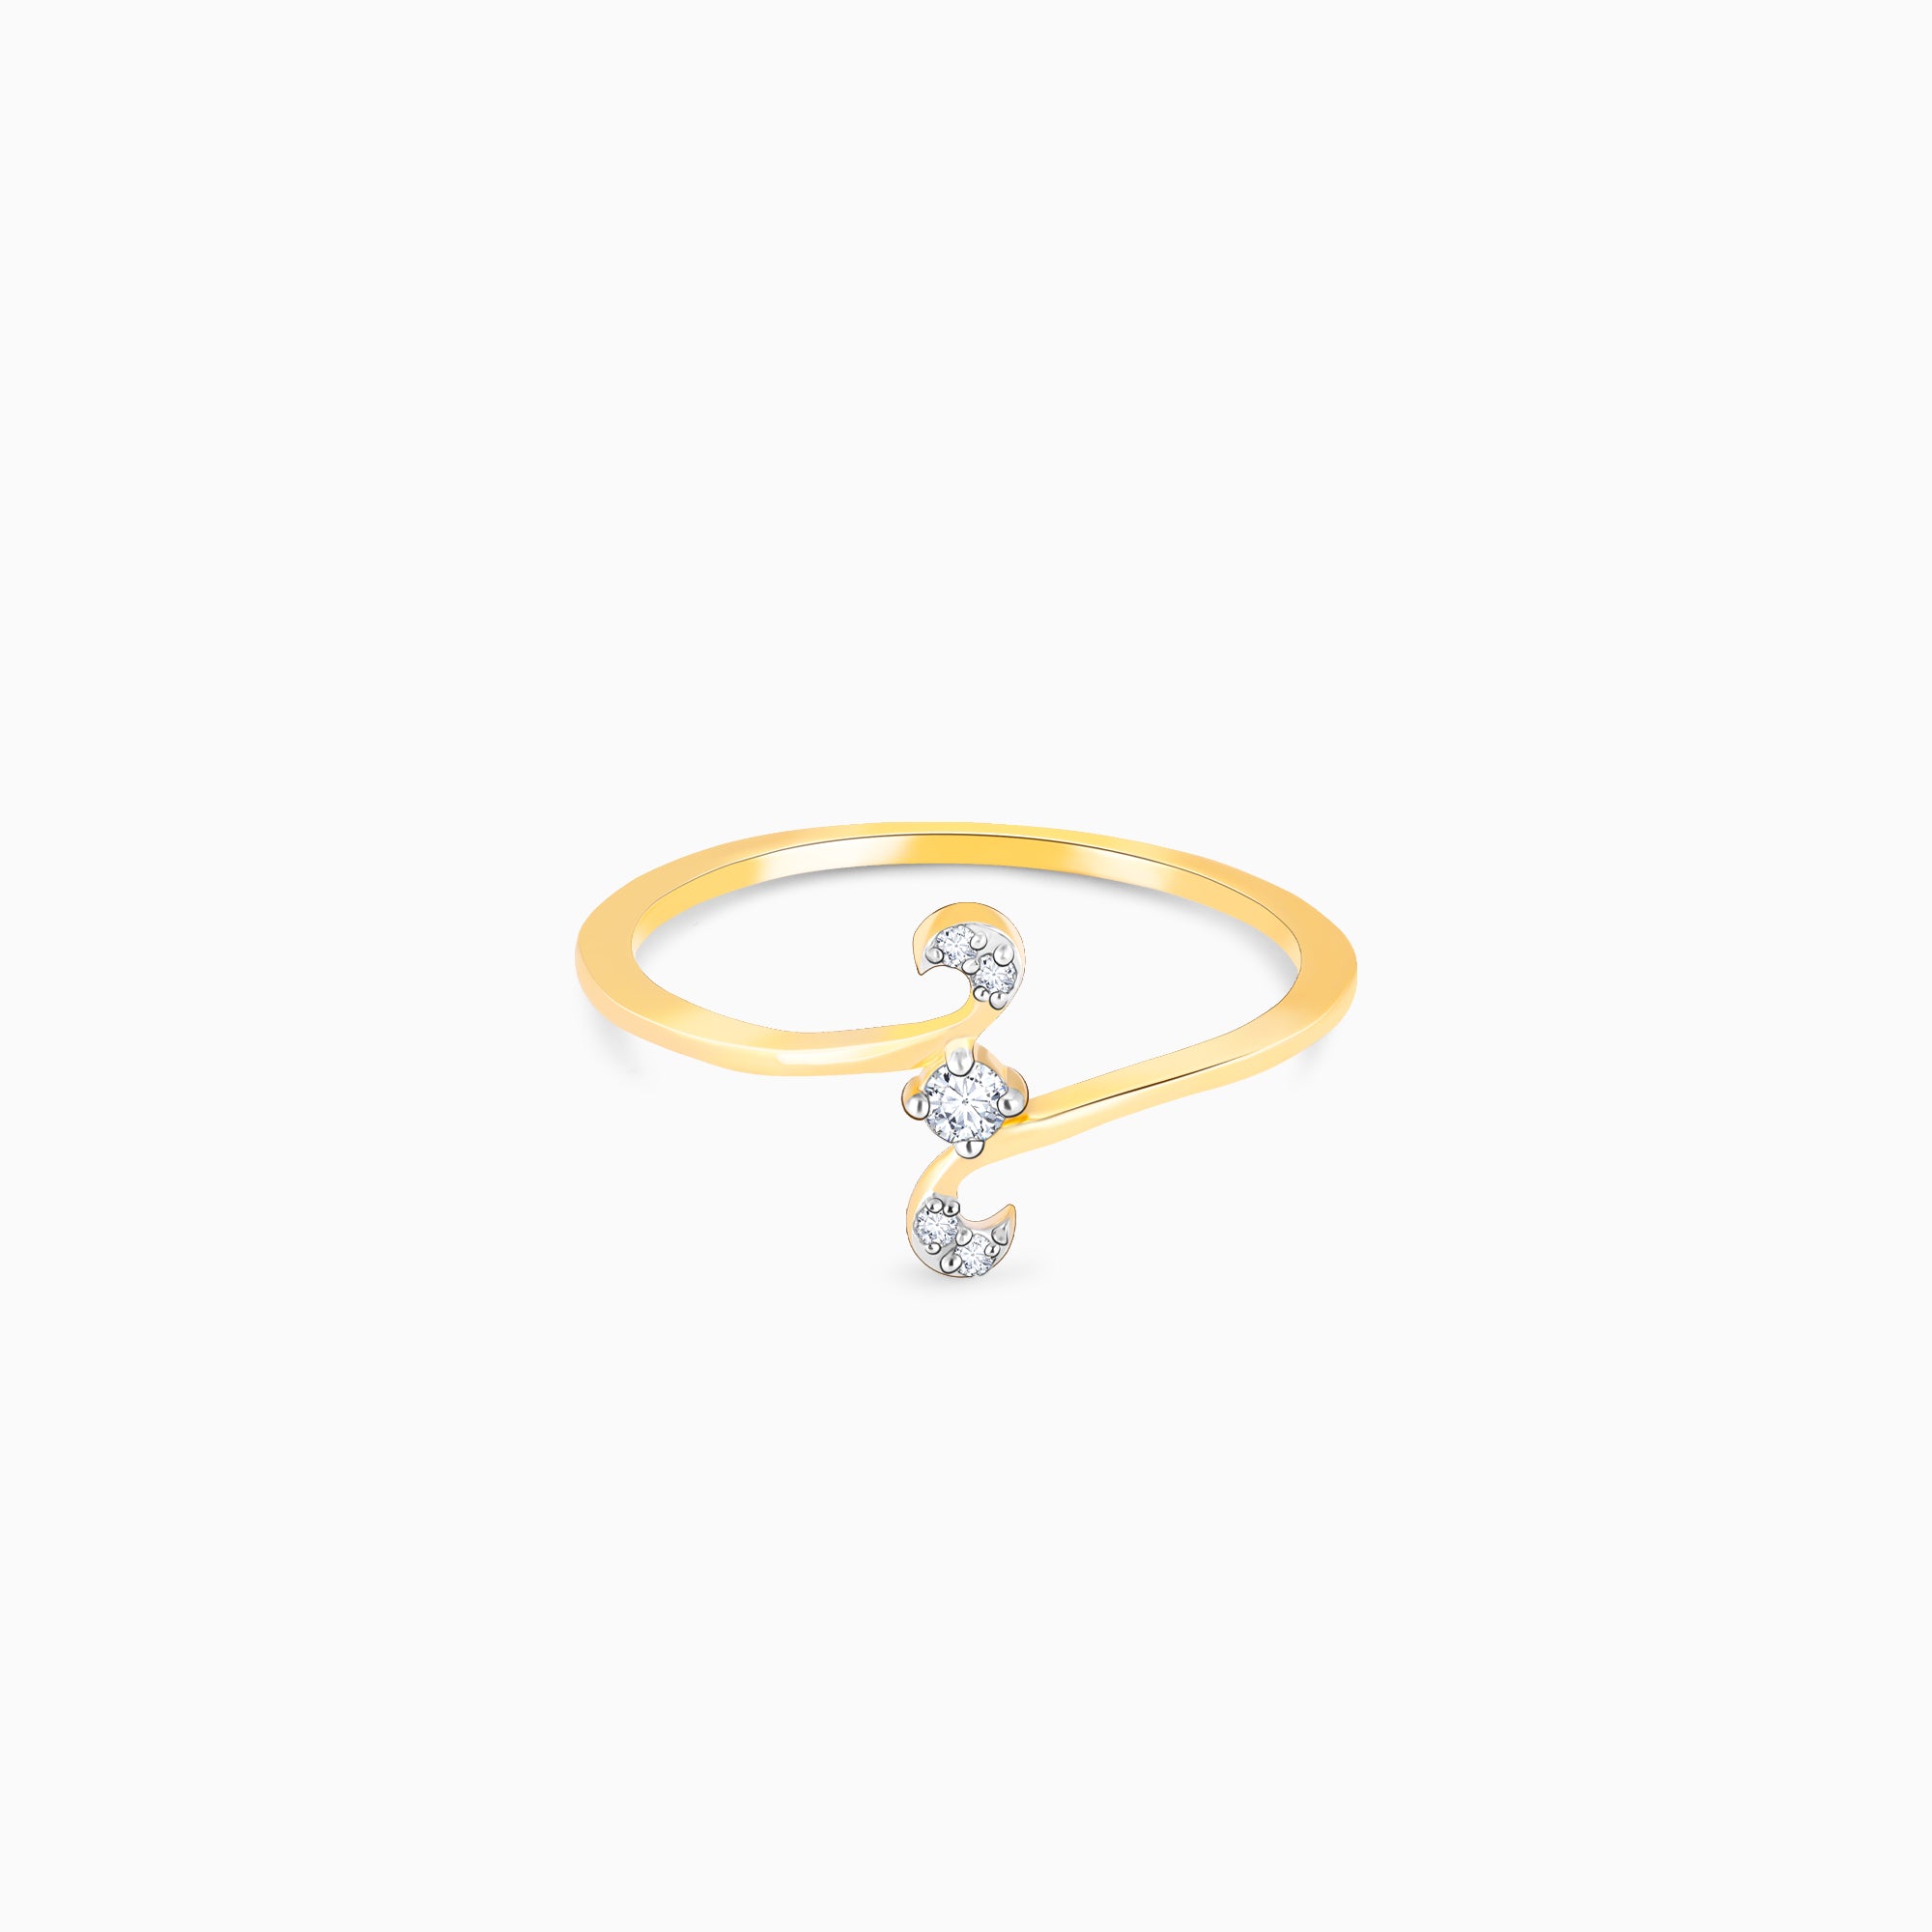 Simple Gold Rings - Plain Gold Rings - Minimalist Jewelry